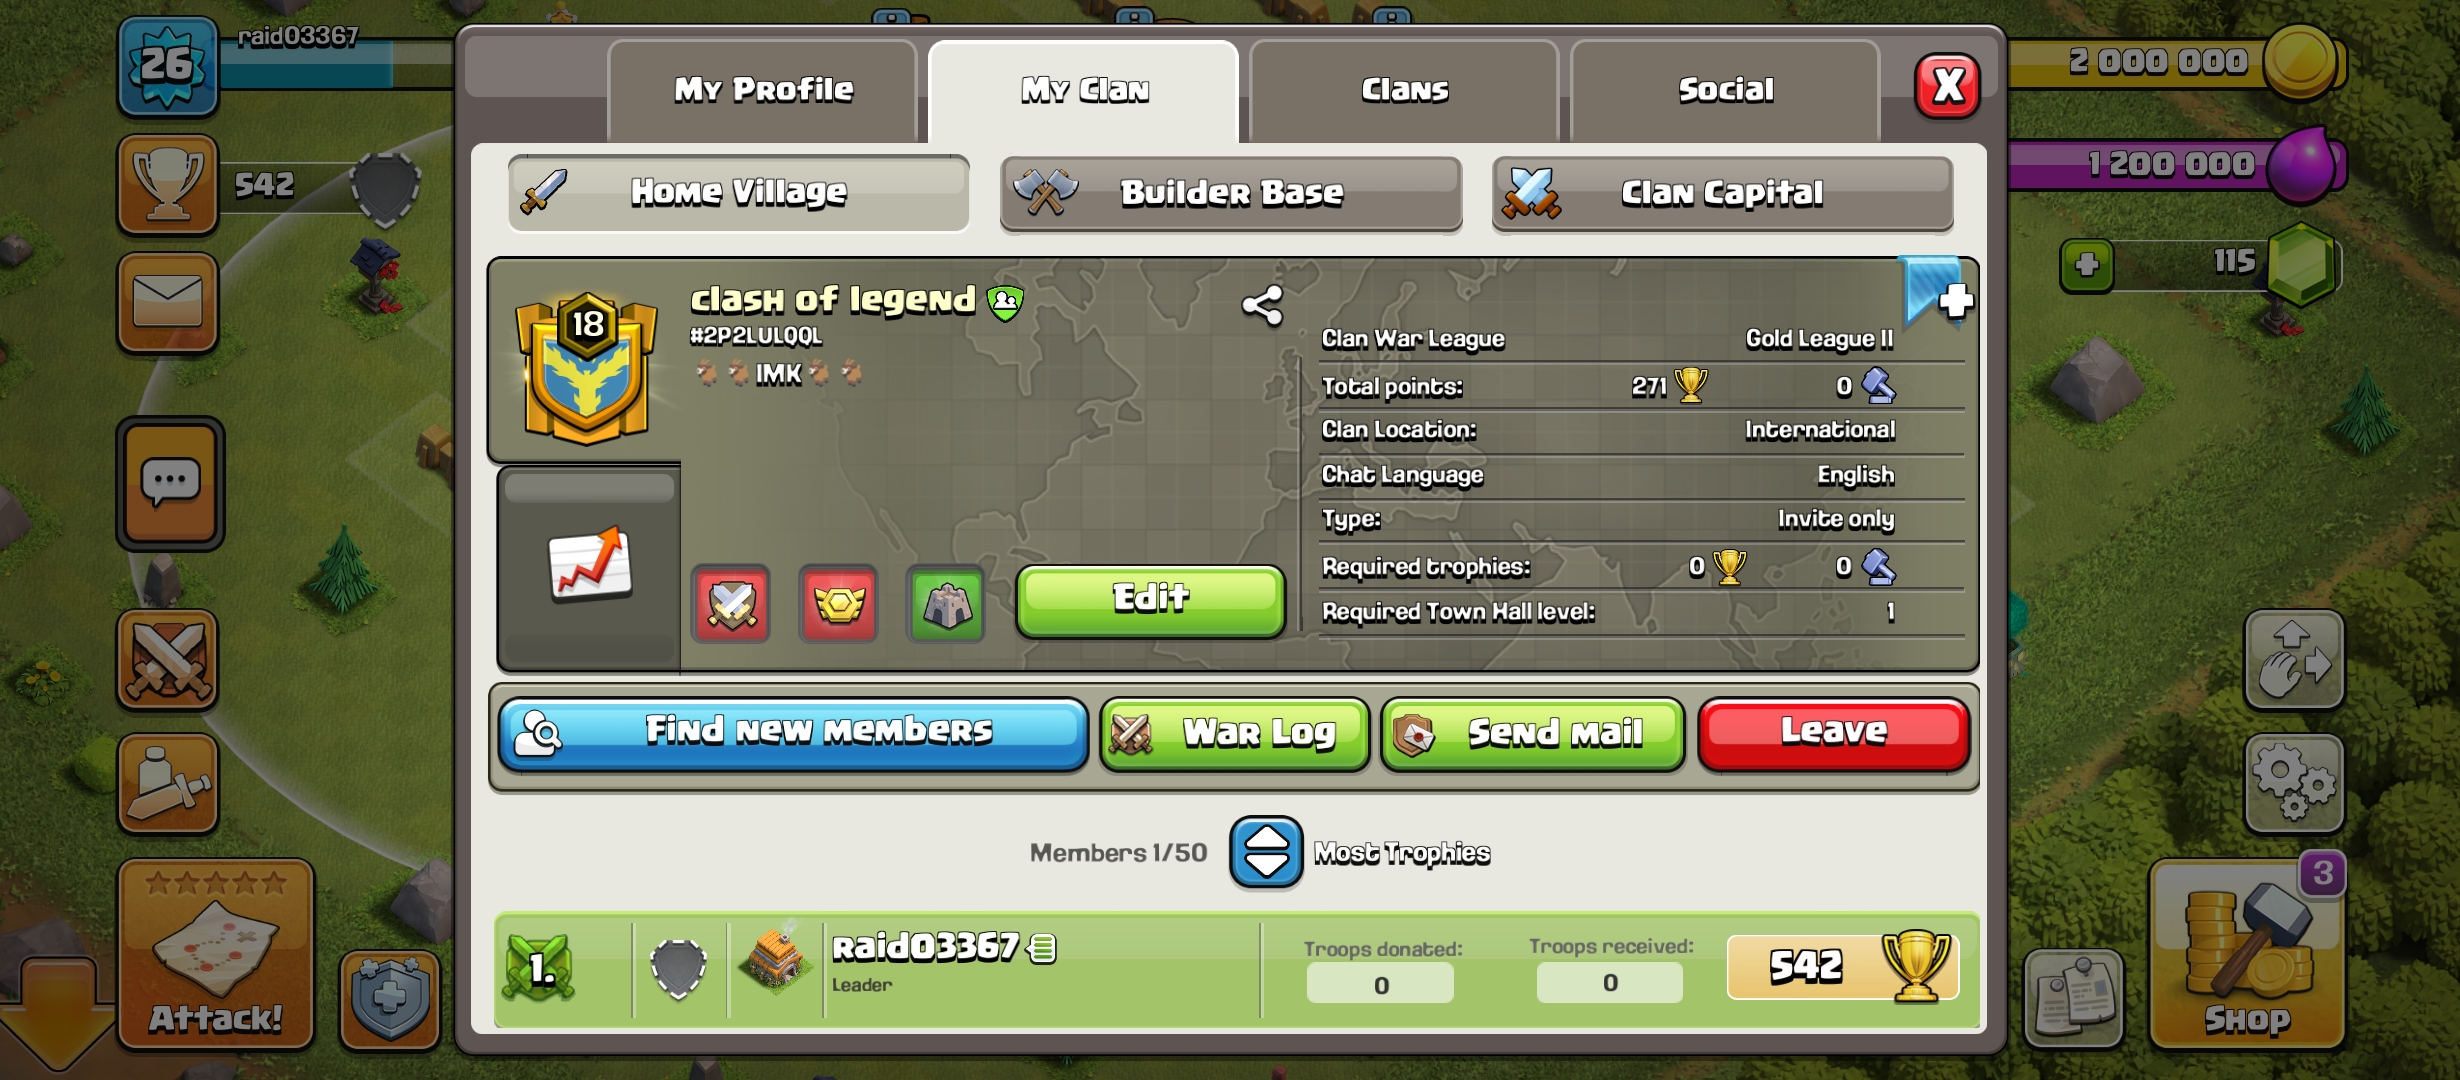  # CAPITAL HALL  8 ( upgradeable to CH 9 )# | Level 18 | Name : clash of legend | W 218 , 181  |  League : GOLD 2